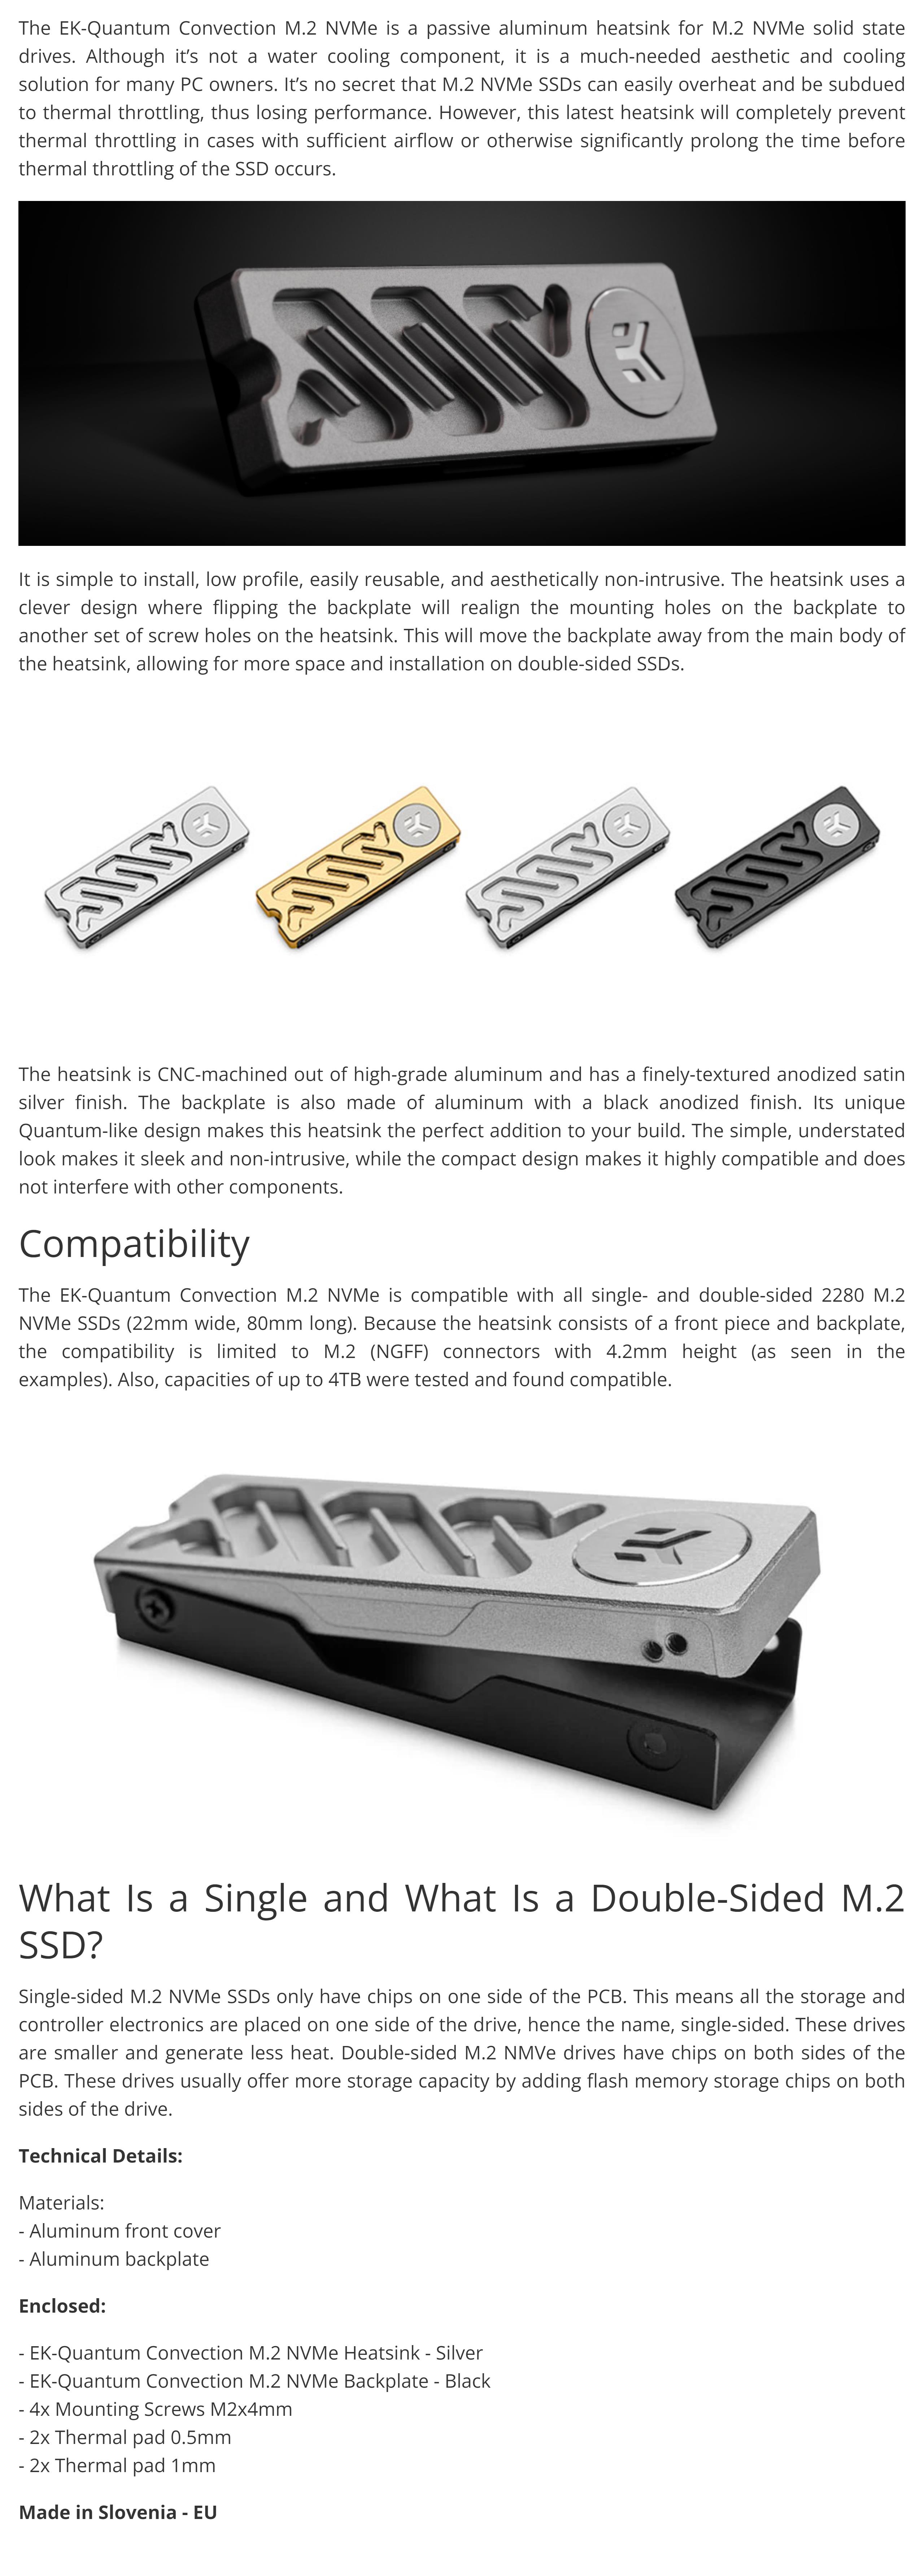 A large marketing image providing additional information about the product EK Quantum Convection M.2 NVMe Heatsink - Silver - Additional alt info not provided